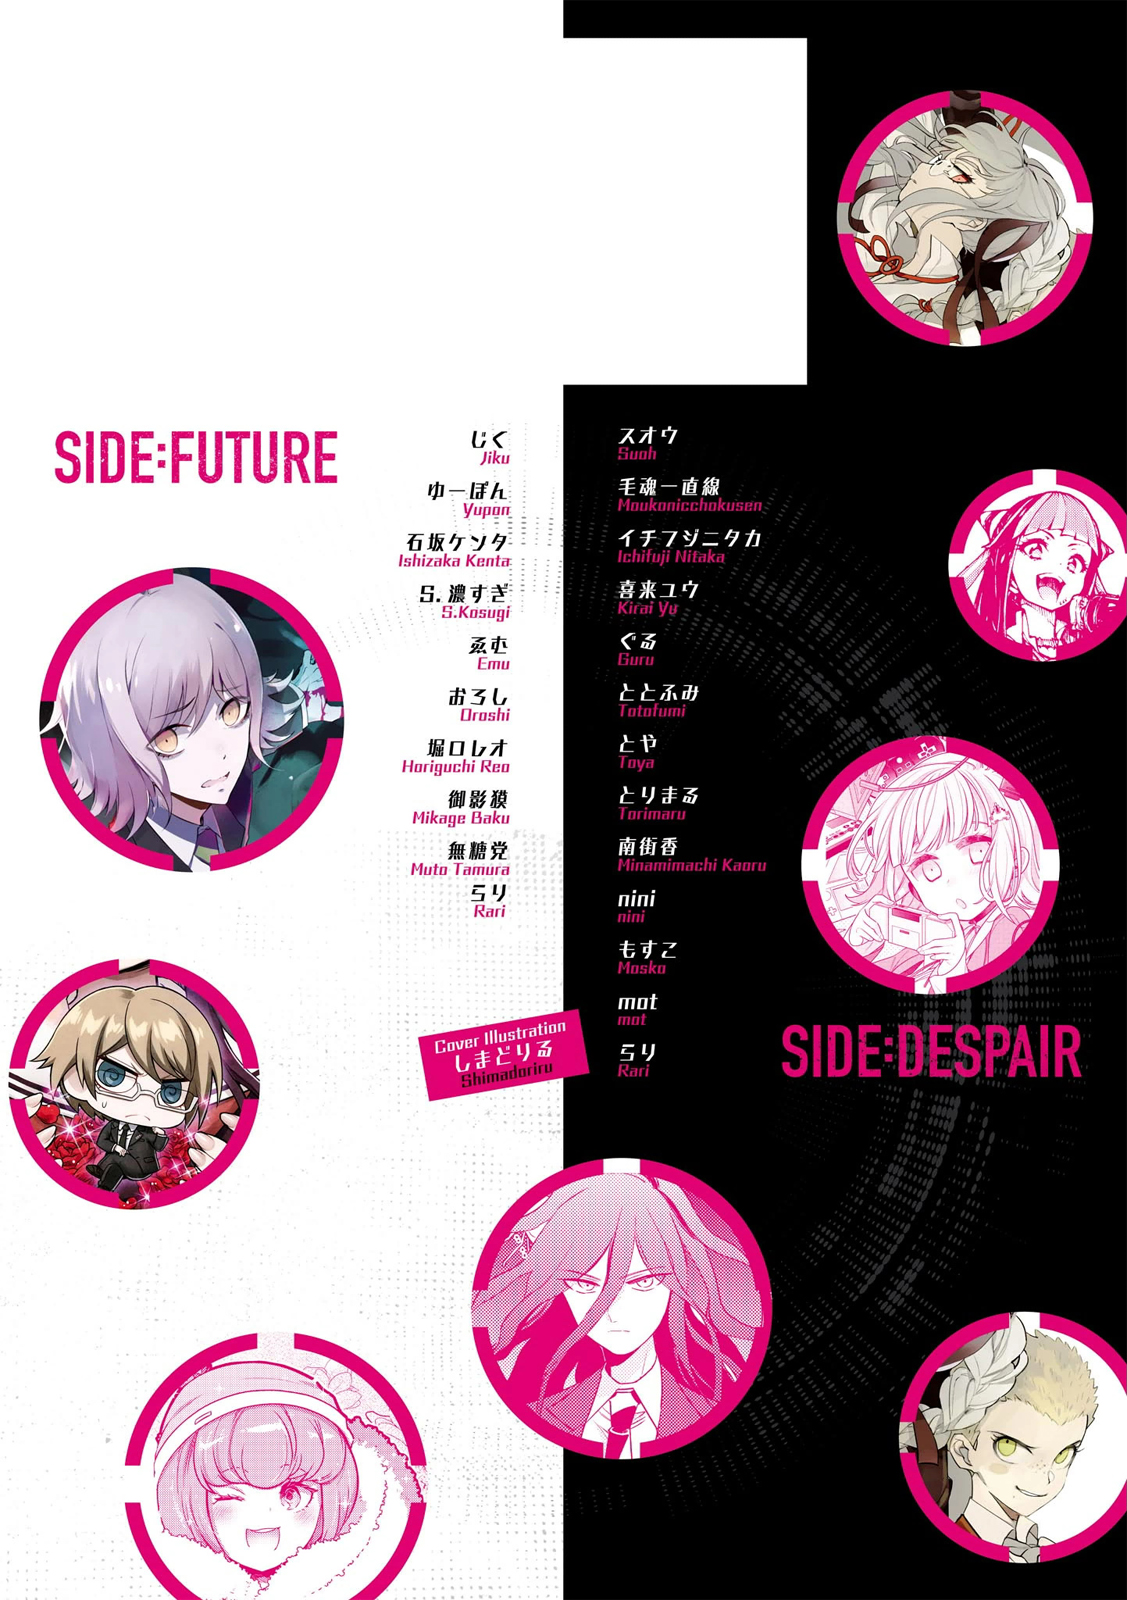 Danganronpa 3: The End of Hope's Peak Academy Future Arc & Despair Arc Comic Anthology (Dengeki Comics EX) Vol. 1 Ch. 21 Let's Live Youth to the Fullest by Totofumi (End)